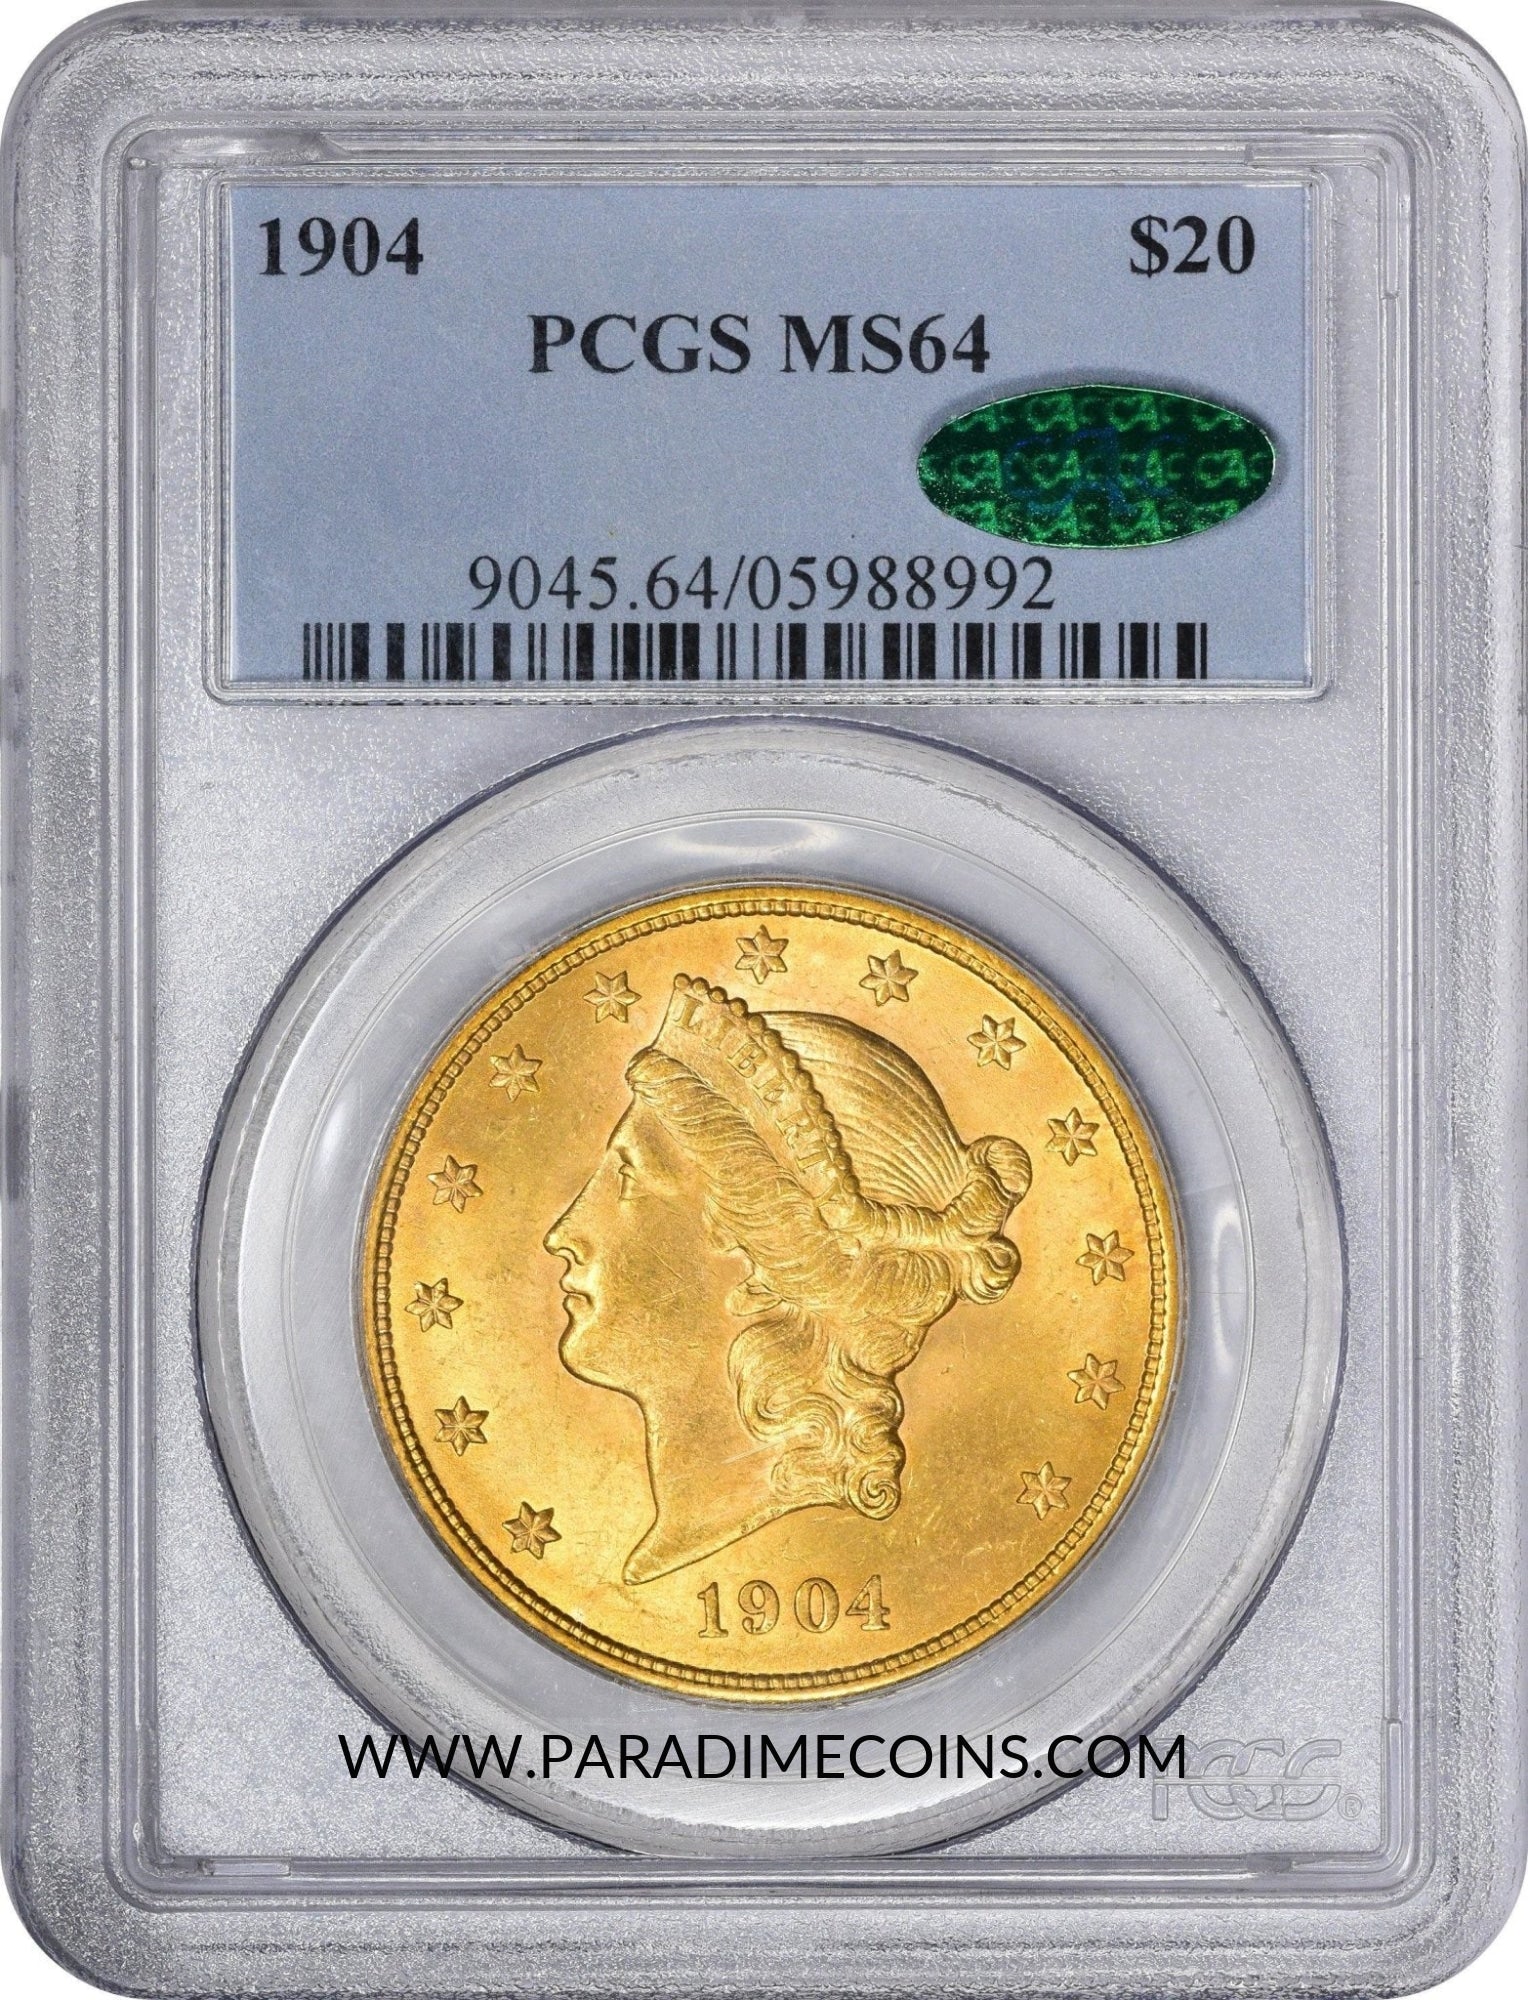 1904 $20 MS64 PCGS CAC - Paradime Coins | PCGS NGC CACG CAC Rare US Numismatic Coins For Sale